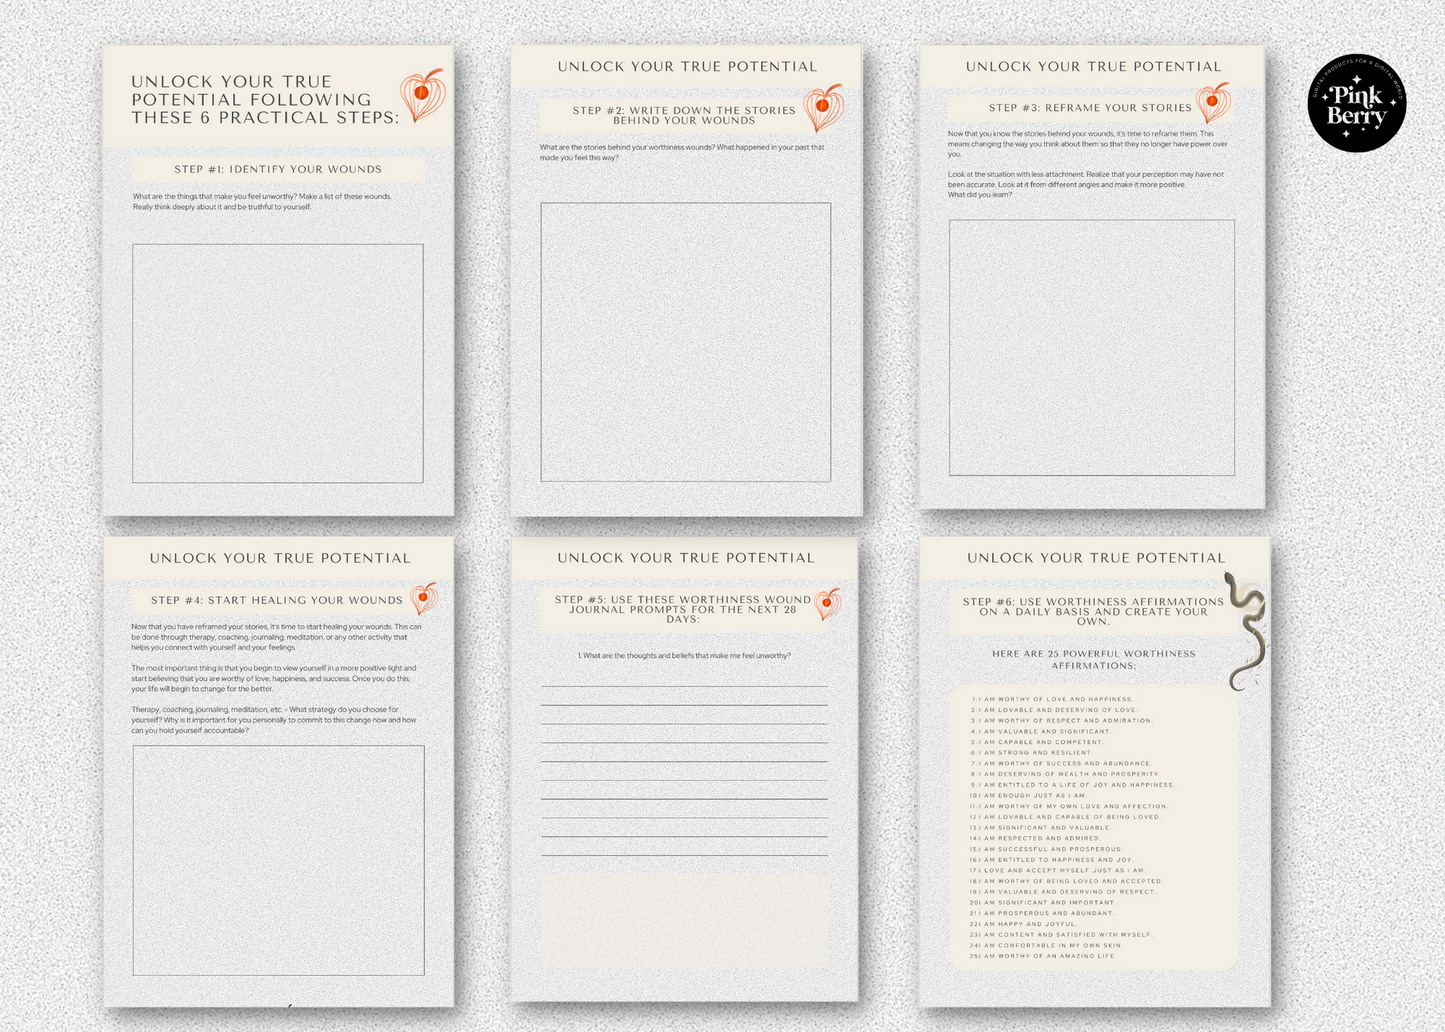 Inner Core Wounds Digital Workbook-52 Page Goodnotes Digital Workbook- 6 Steps With Writing Prompts